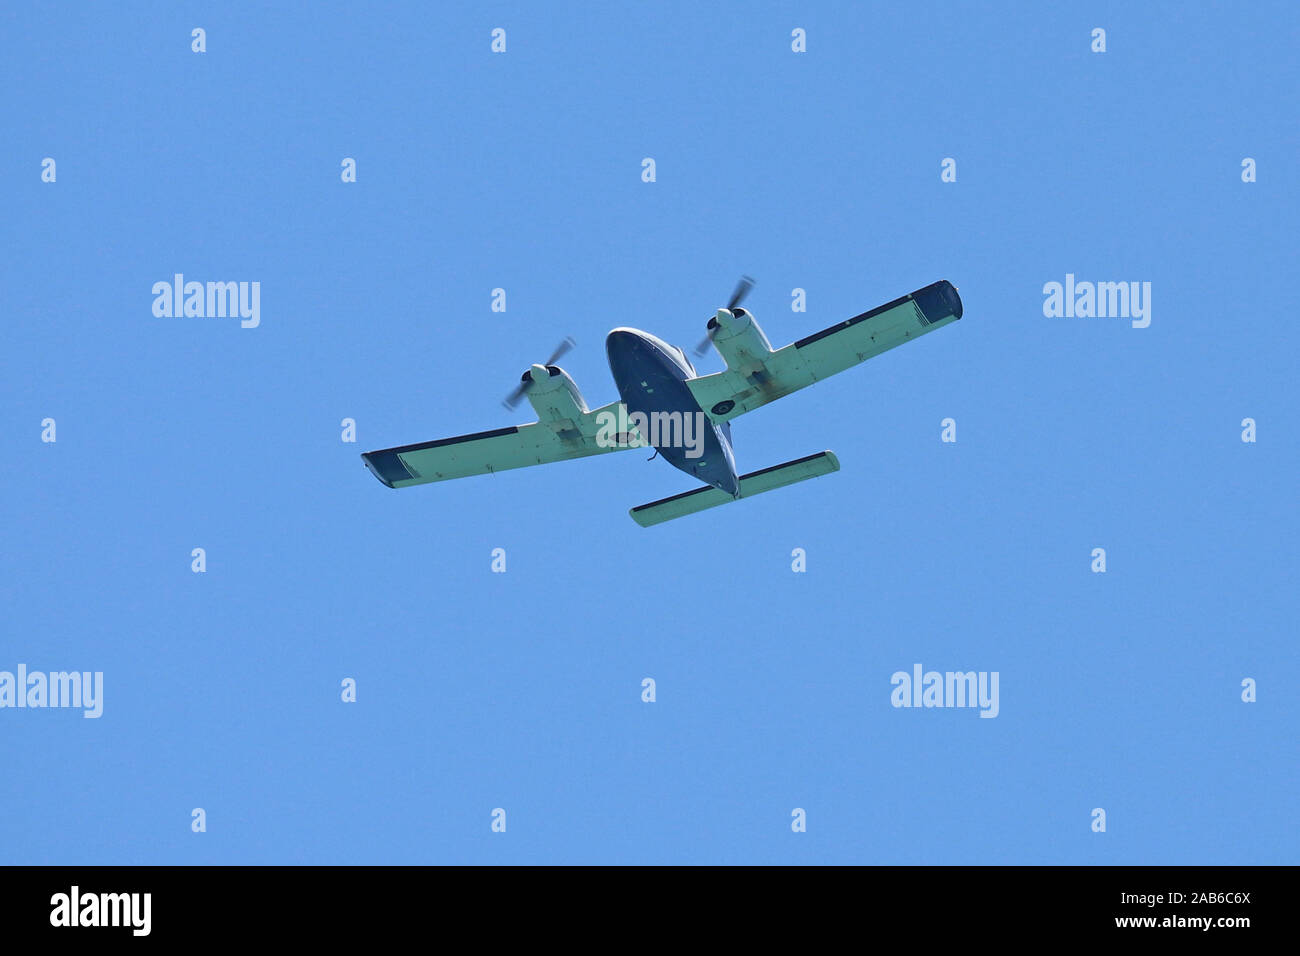 Twin engine light aircraft flying overhead with a blue sky background. Stock Photo